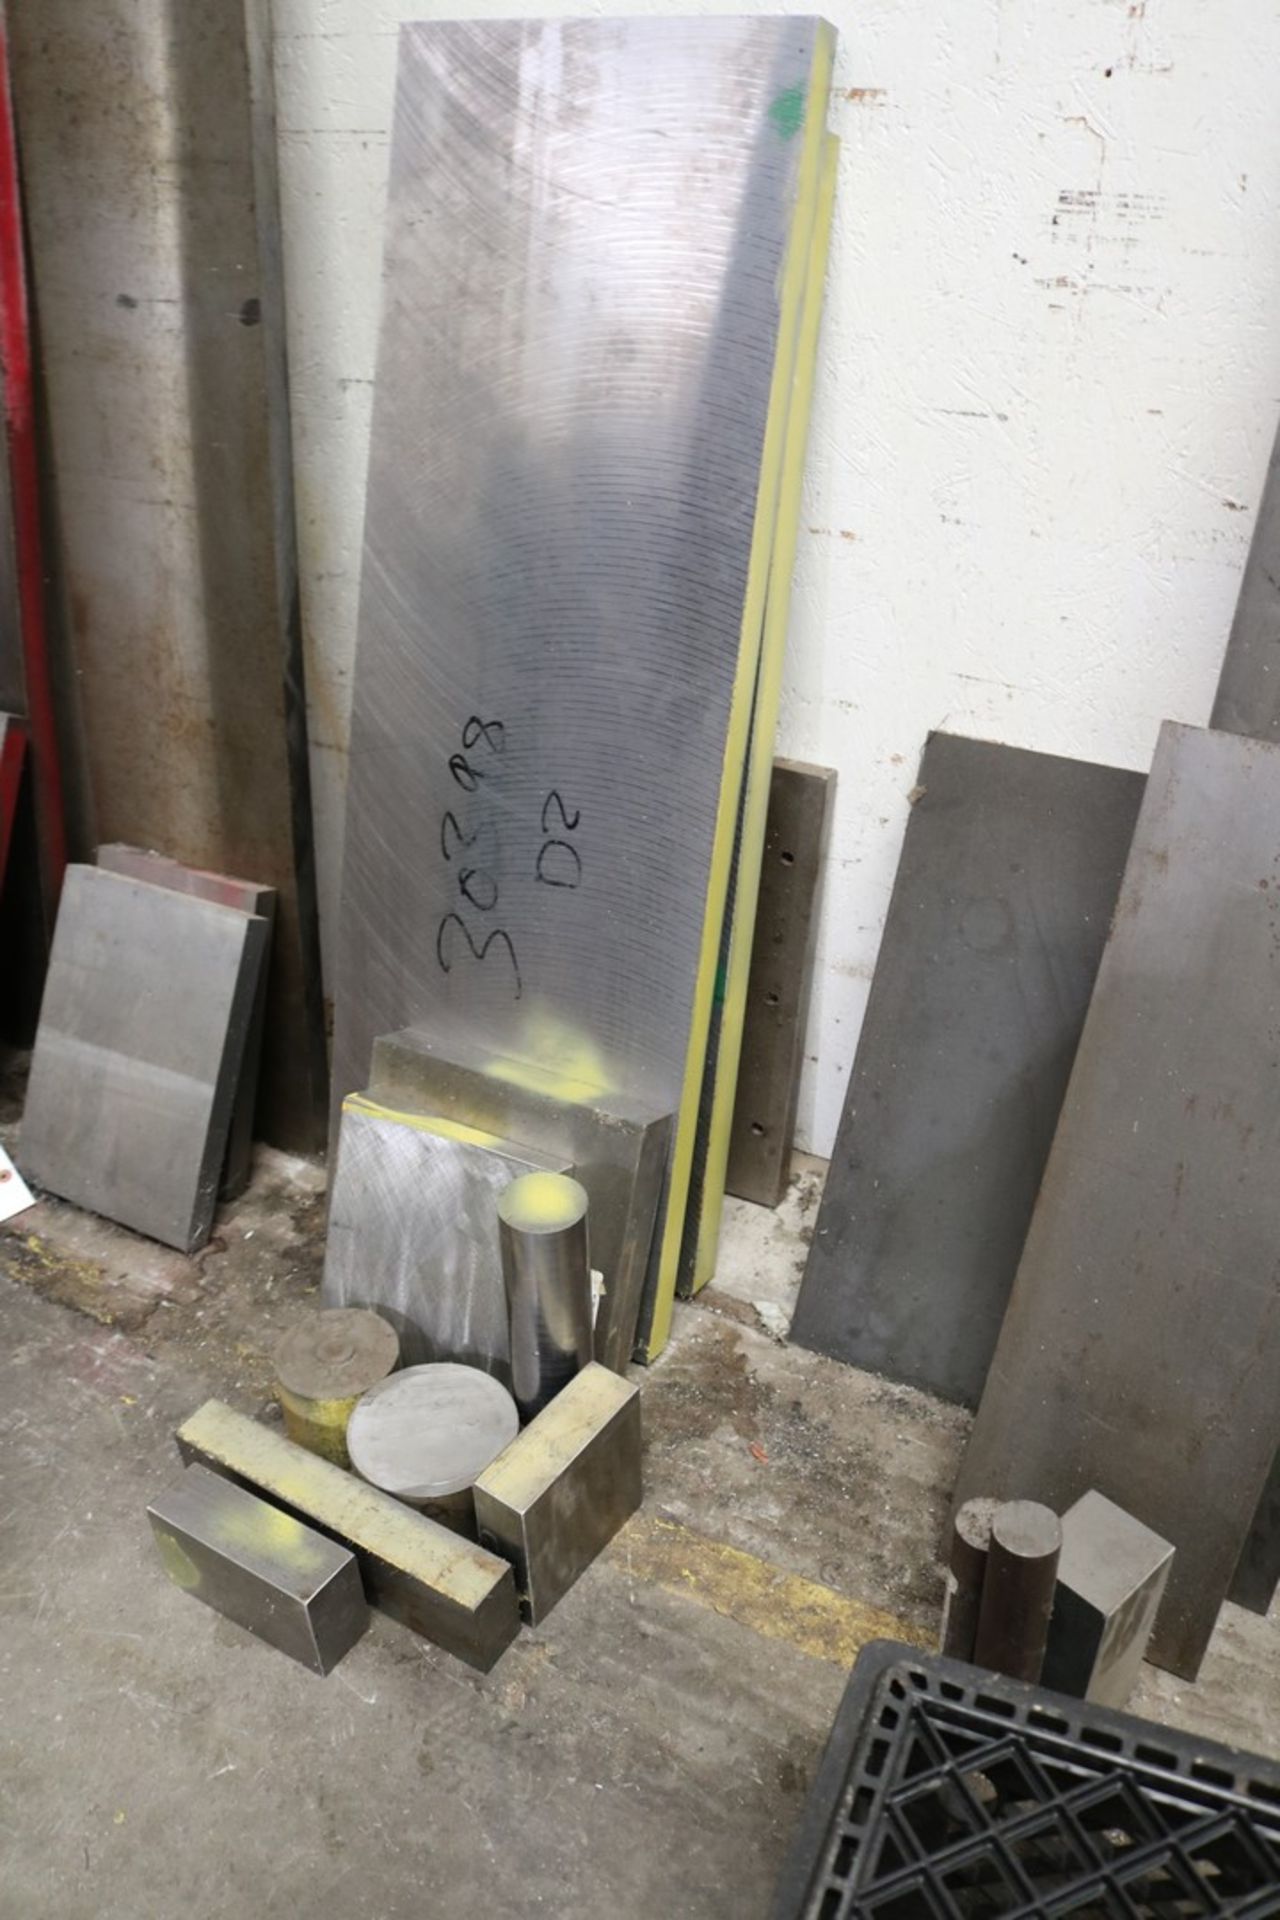 Lot of Various Material D2 Tool Steel, CPM10V Tool Steel, M2 Tool Steel and Vanadis 4 Tool Steel - Image 6 of 11